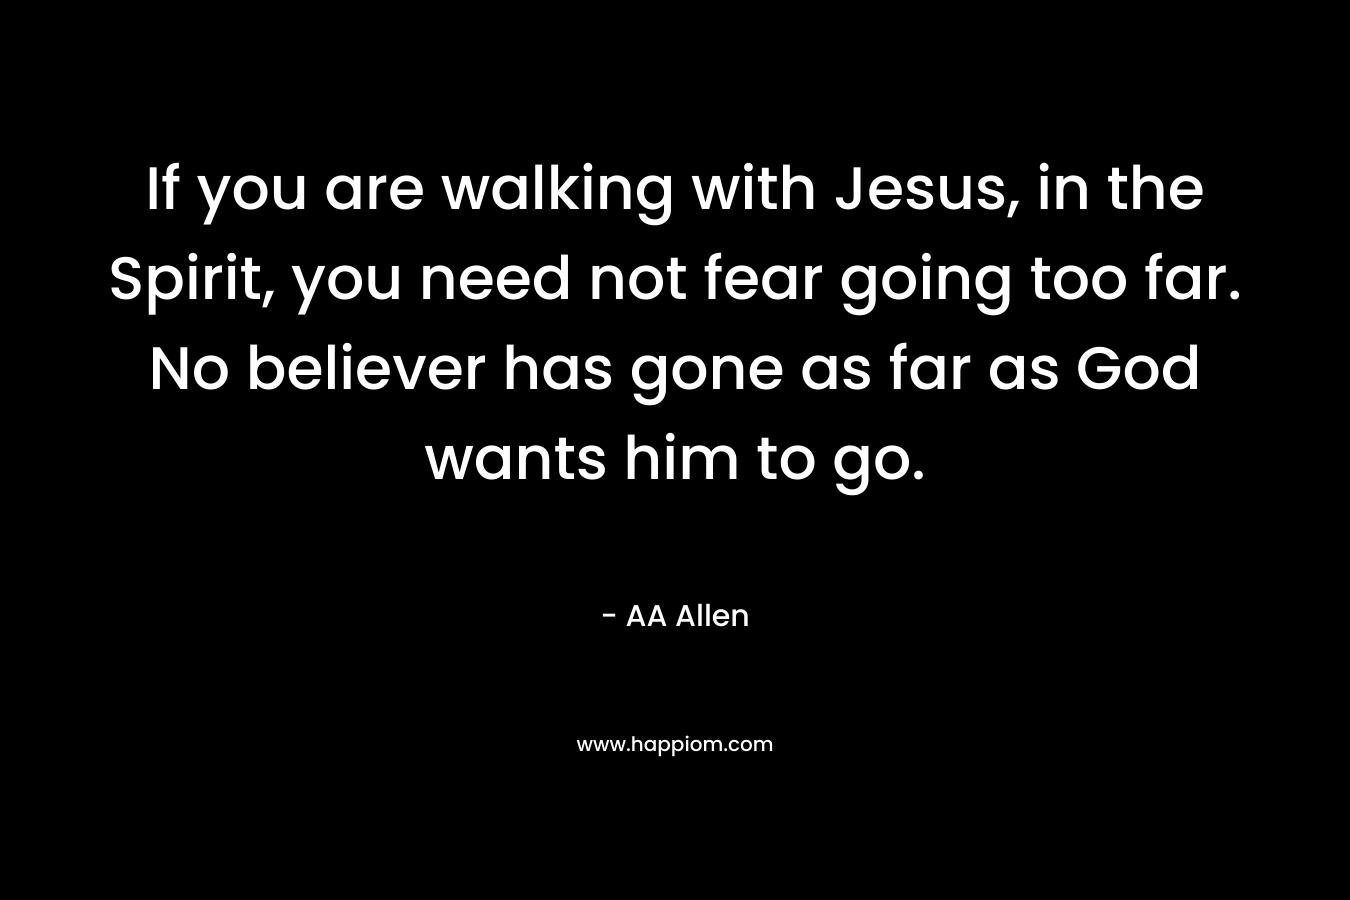 If you are walking with Jesus, in the Spirit, you need not fear going too far. No believer has gone as far as God wants him to go.